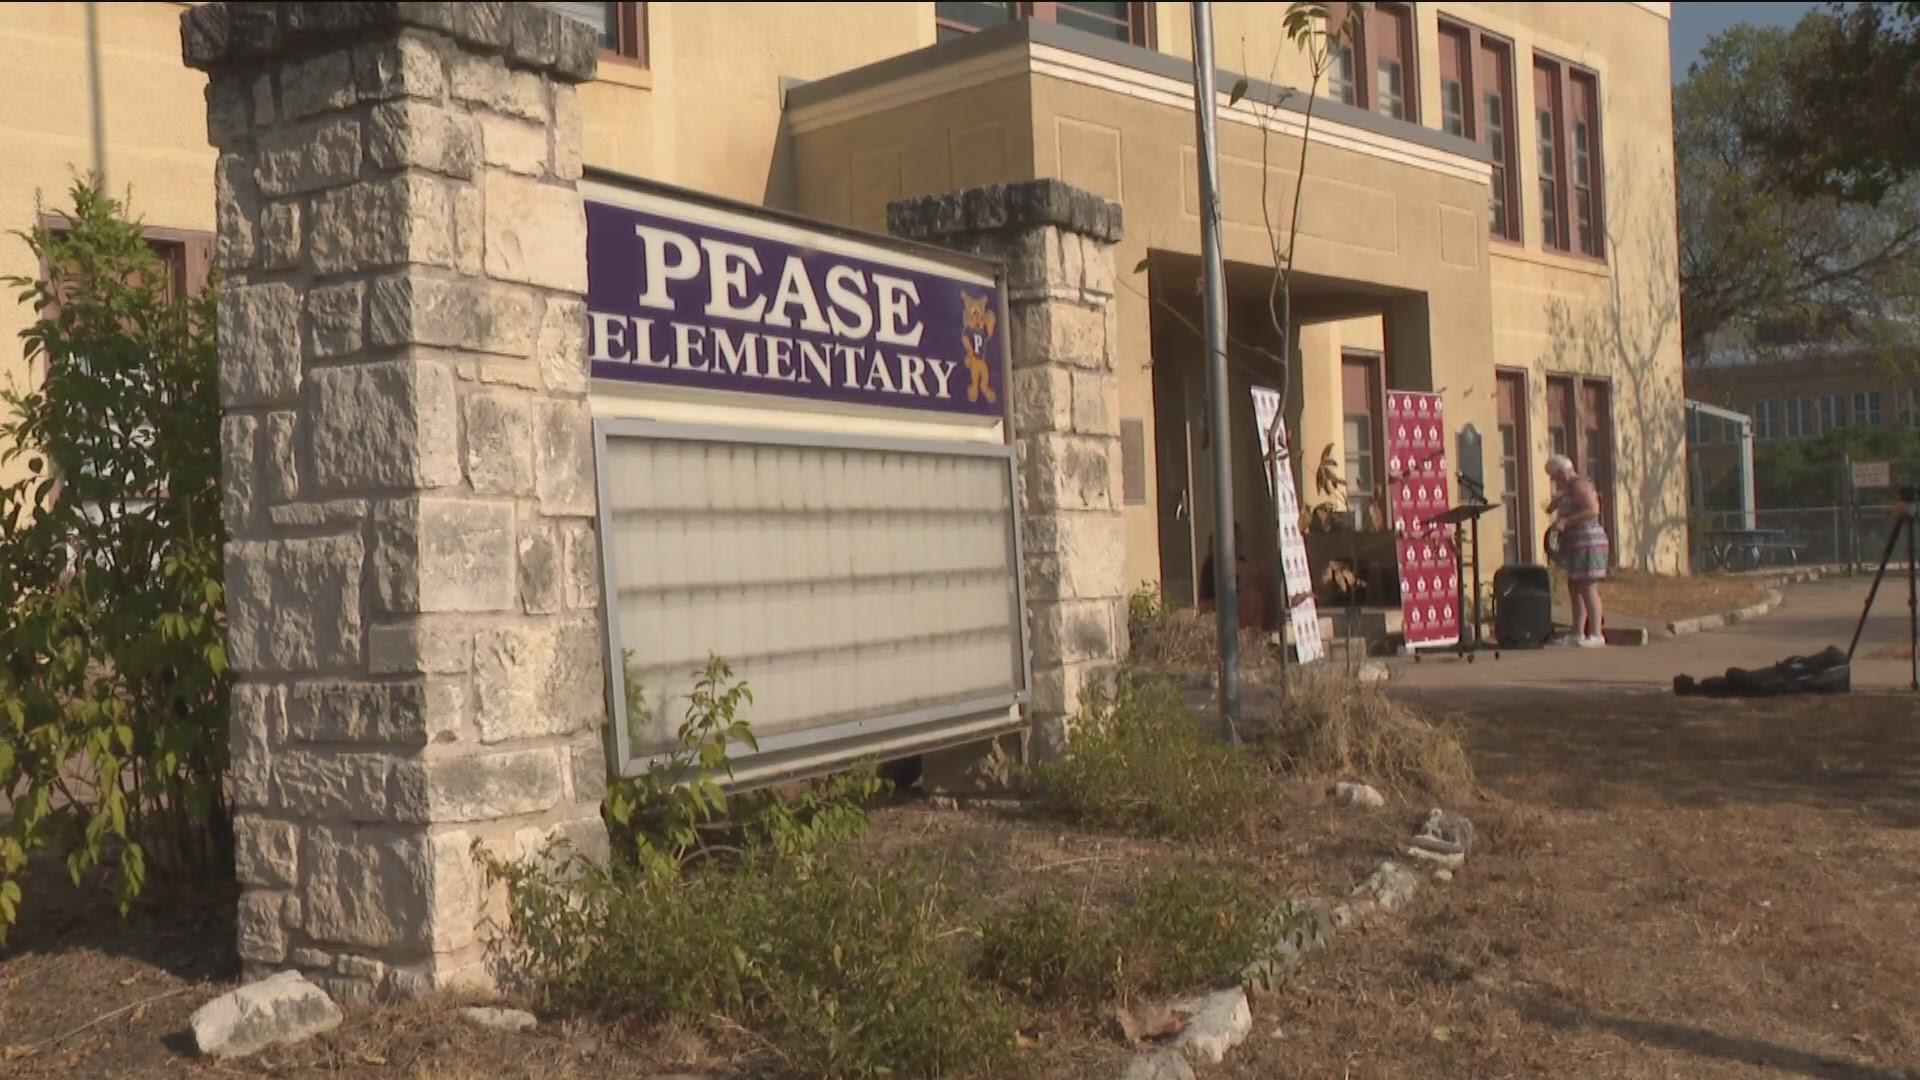 Three years after Pease closed, the district secured $3 million in federal funding to transform the school into an affordable childcare center for its employees.